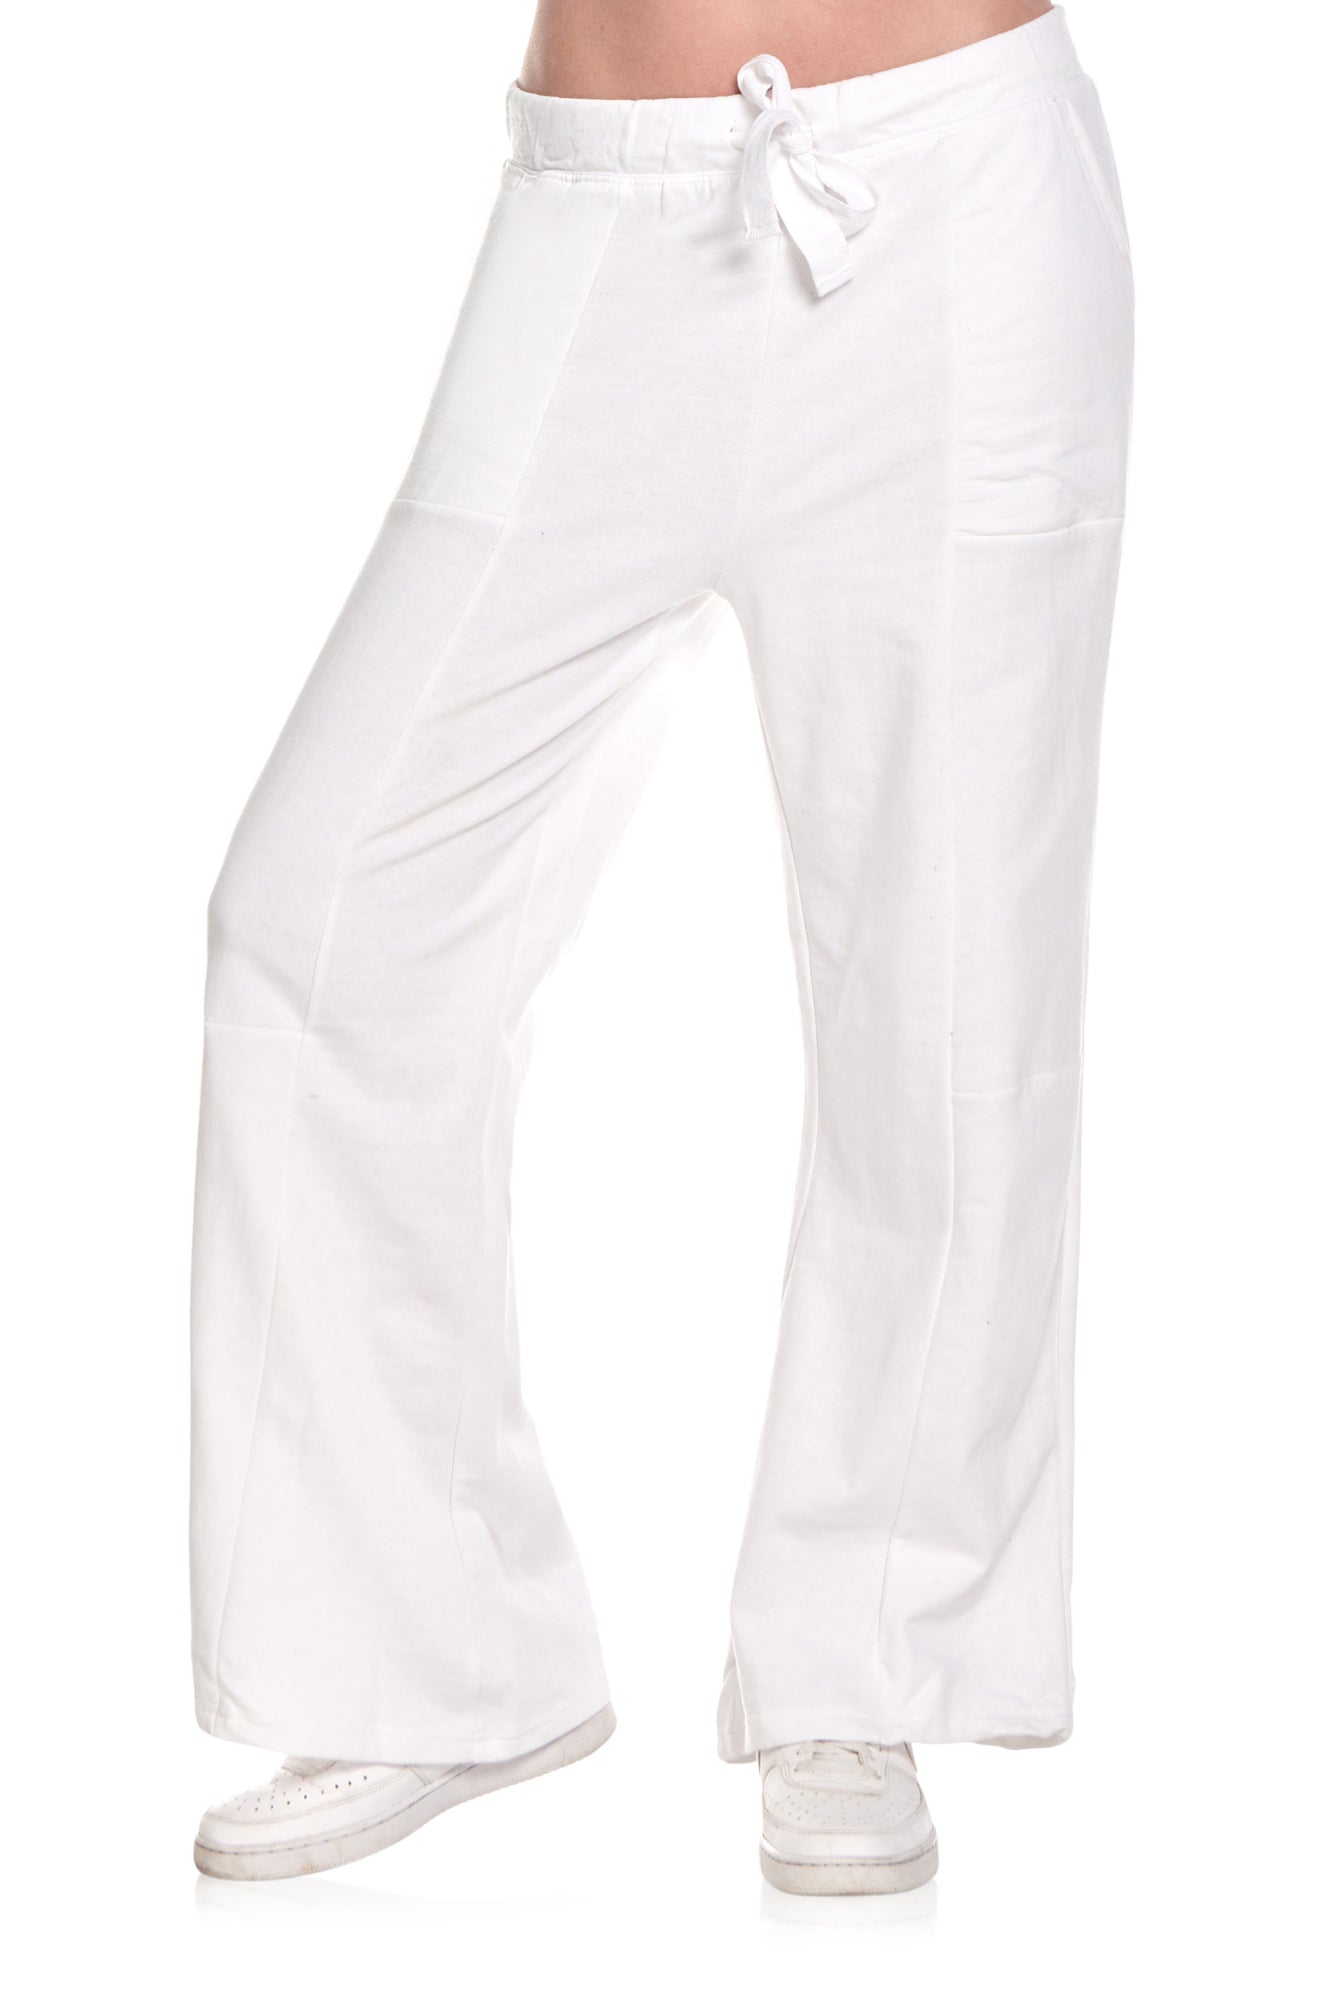 Kyodan Women's Woven Pant with Ribbed Waistband Front Pockets